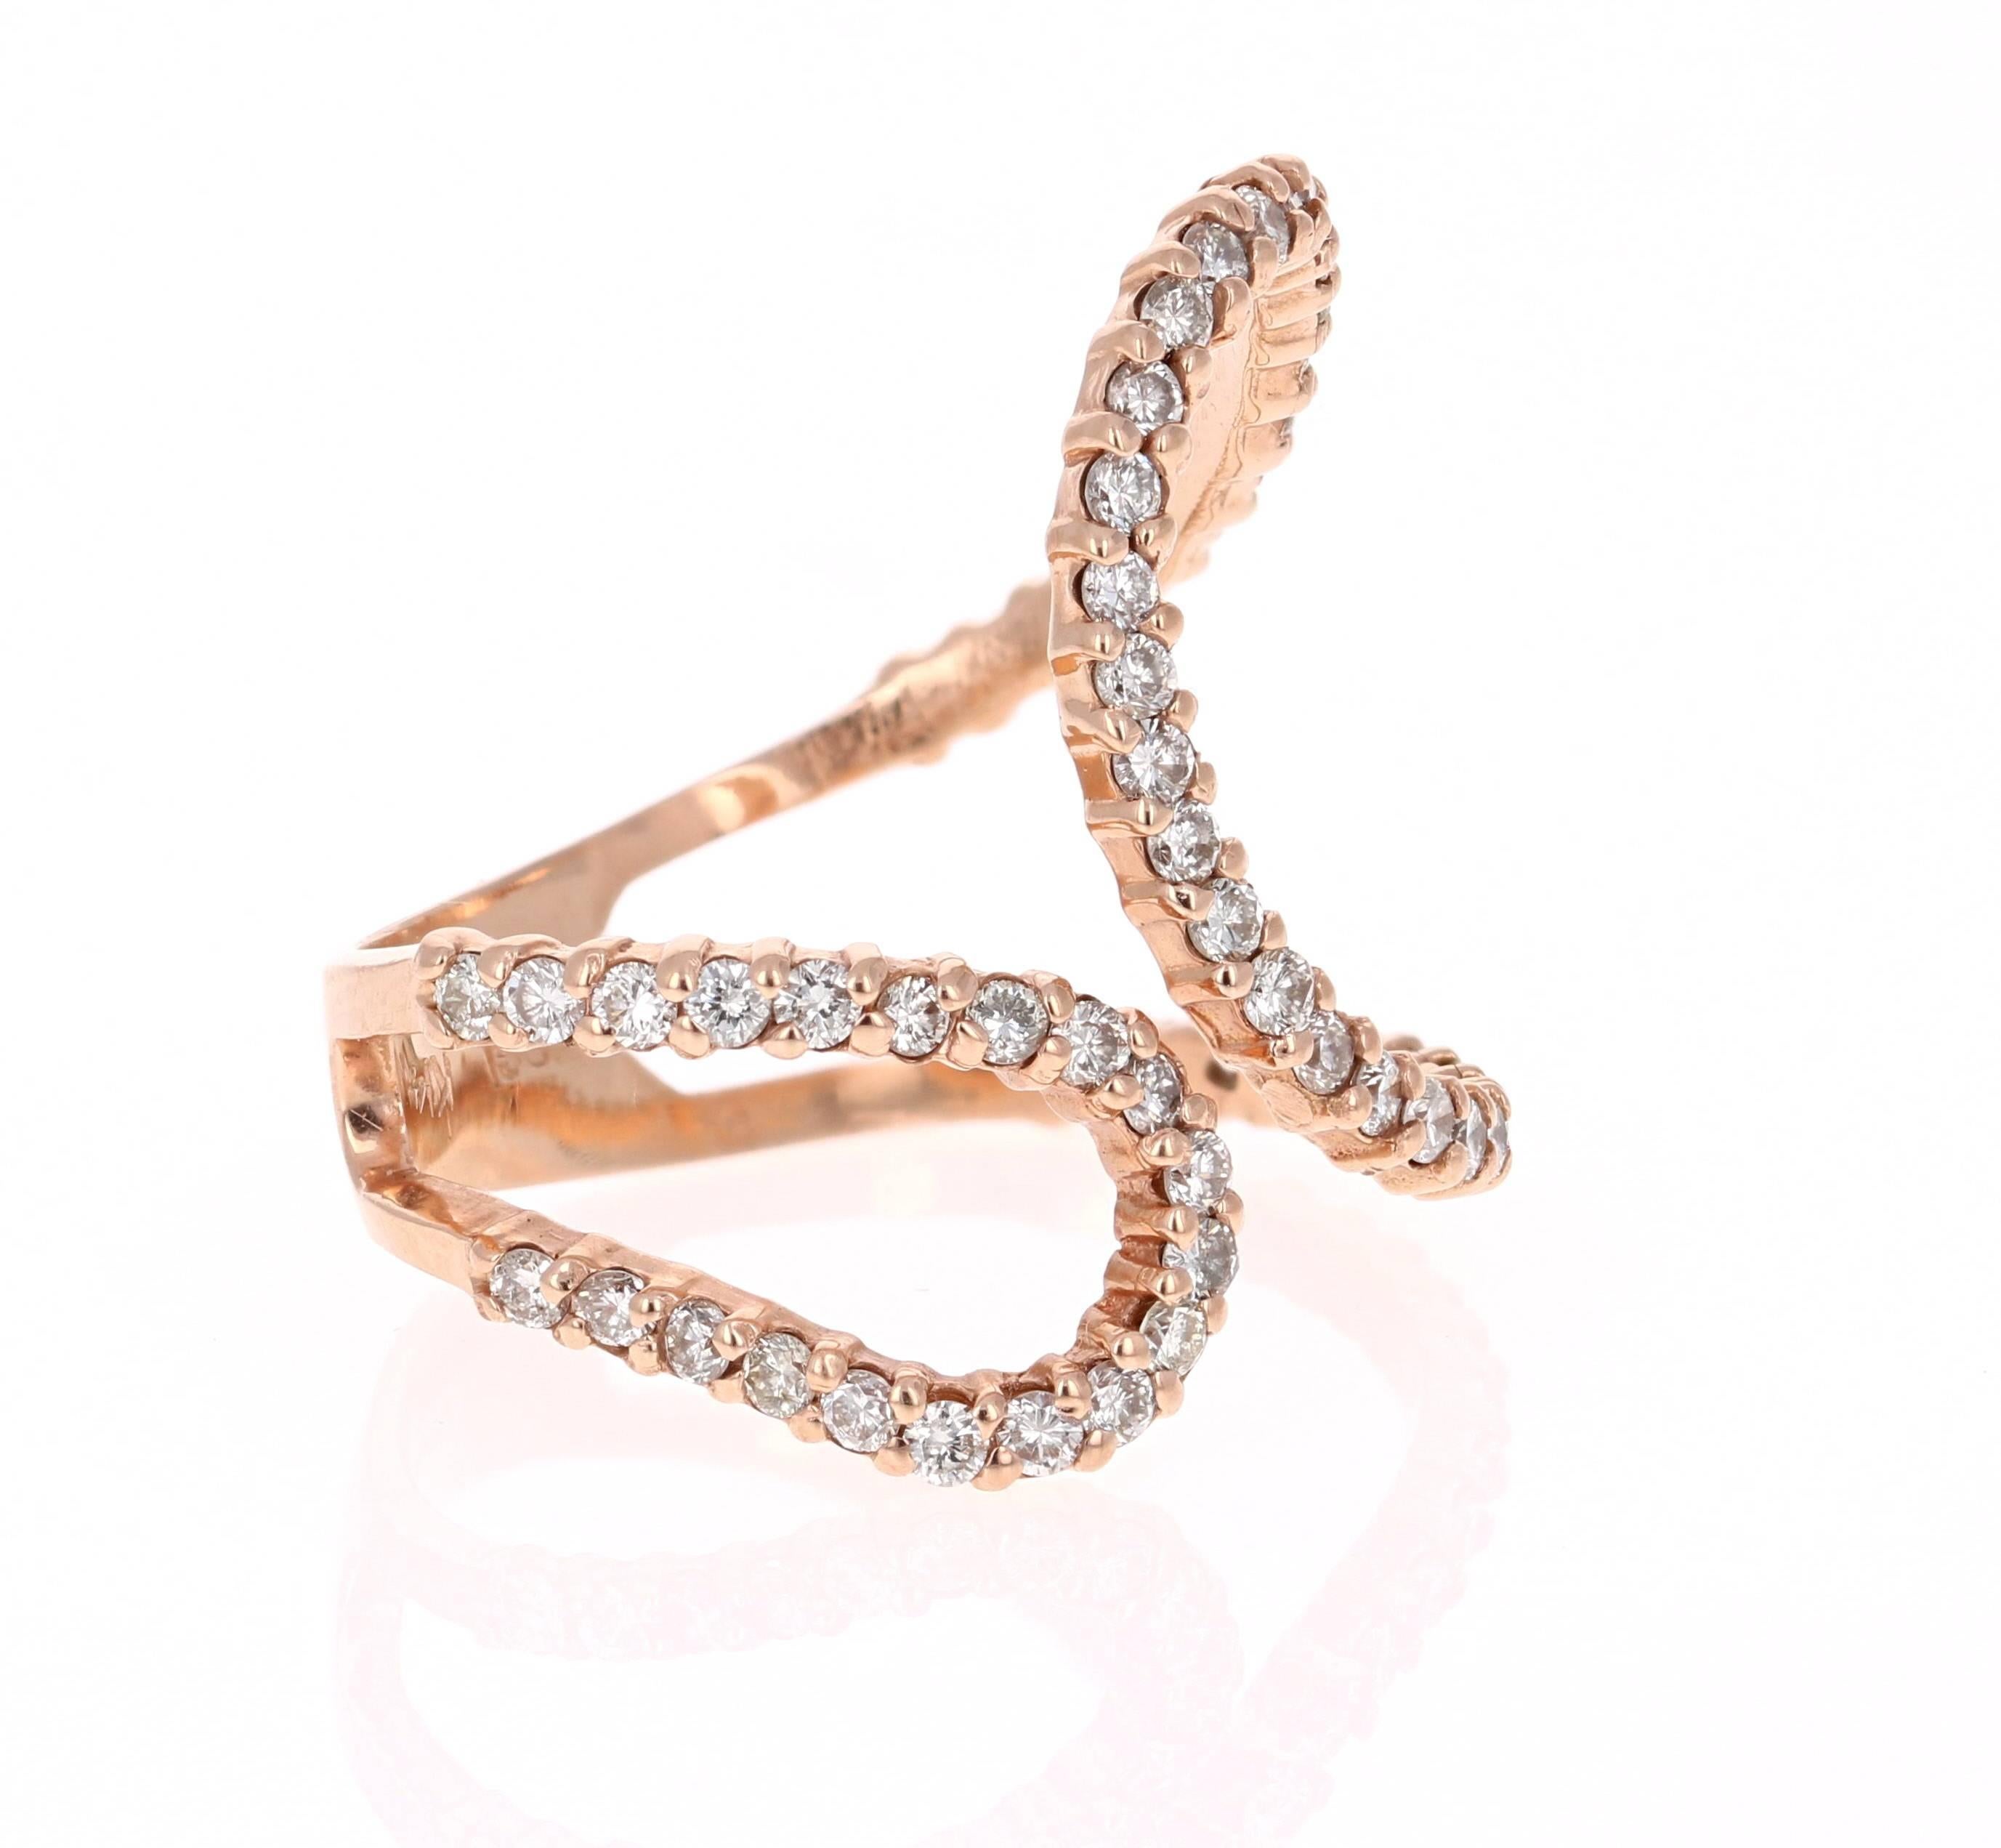 A gorgeous cocktail ring with a twist setting that sits well on the index, middle or ring fingers! Very much on trend with the modern day rings. Can be worn as a statement ring which screams out #bossbabe #bosslady #girlpower for the independent and